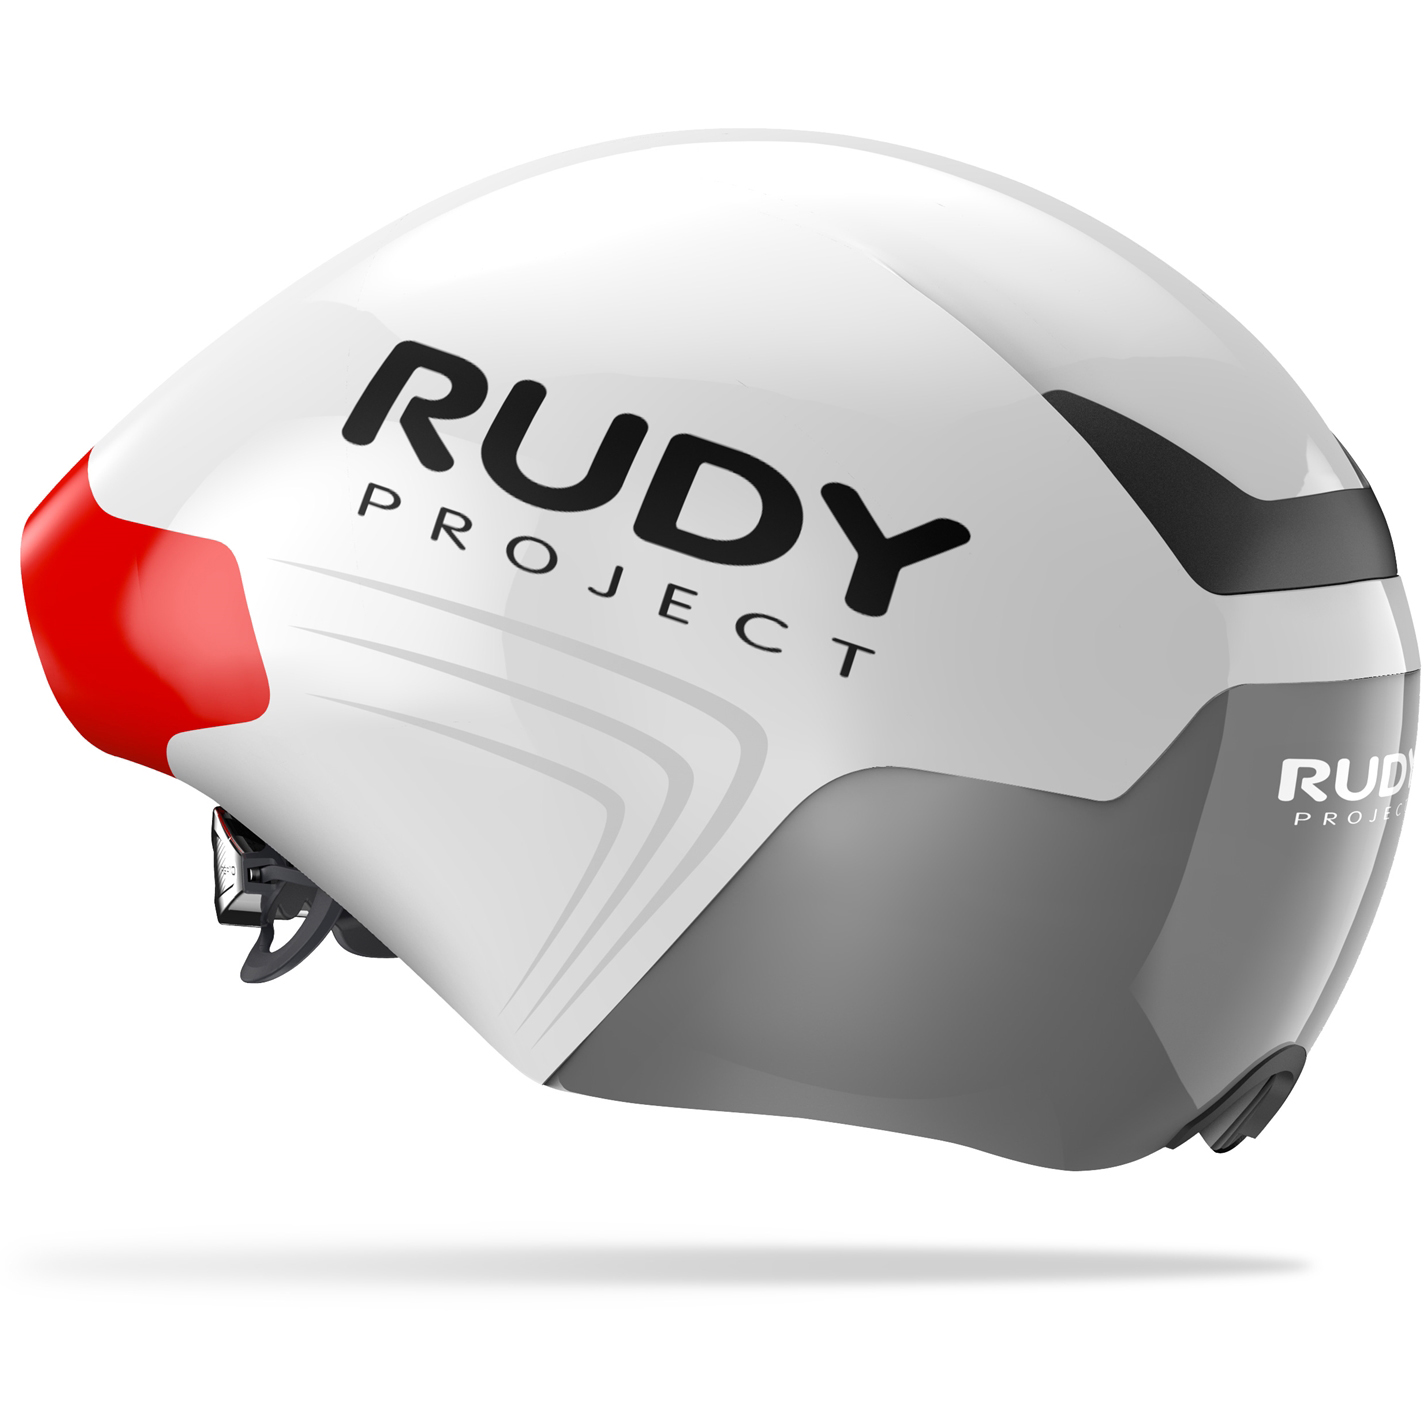 Productfoto van Rudy Project The Wing Helm - White (Shiny) HL730001